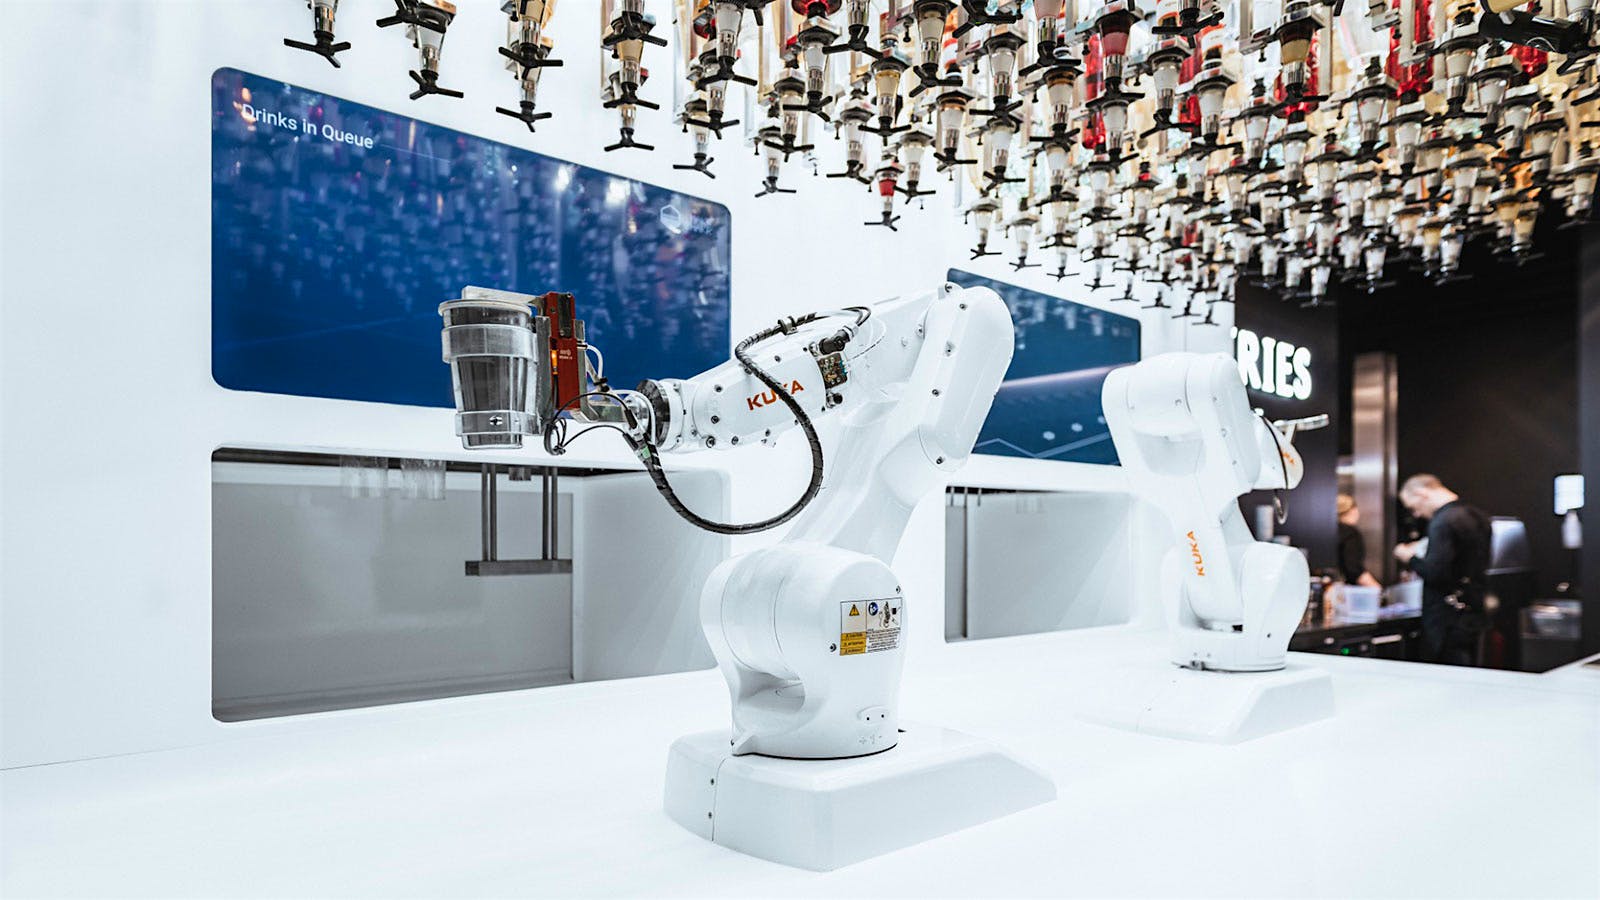 Robot Bartenders, Waiters Surge in Demand in Pandemic; One Memorizes 20,000 Cocktails